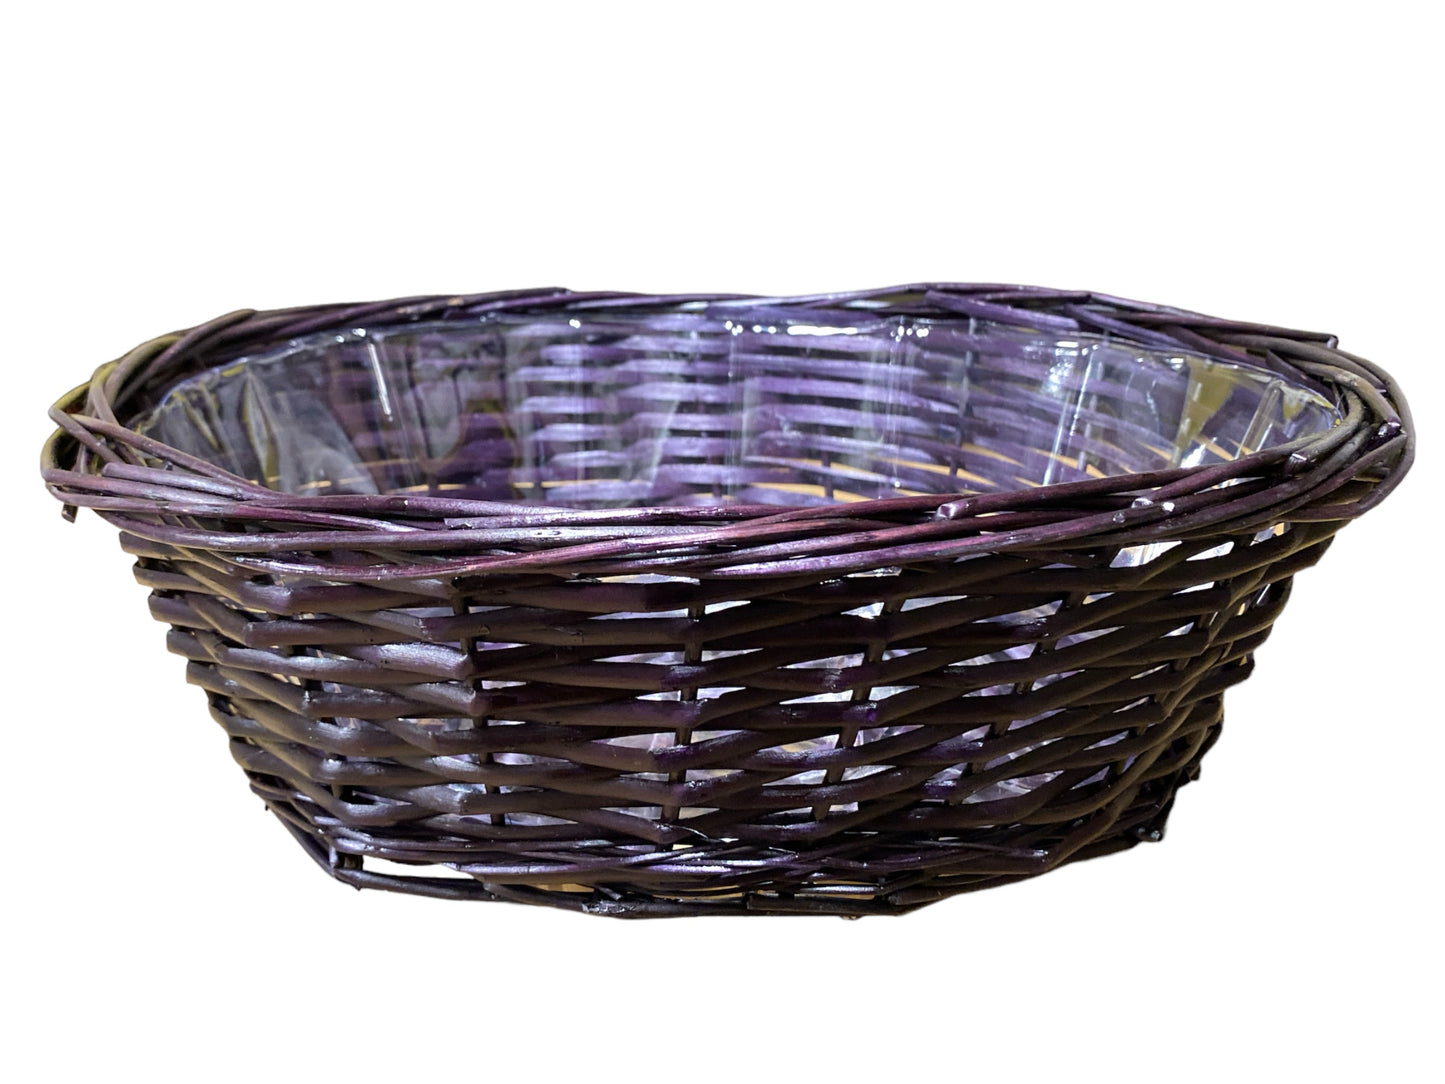 WILLOW OVAL TRAY - WINE - 12 x 5 deep - with Hard Liner - fits a 20x30 basket bag